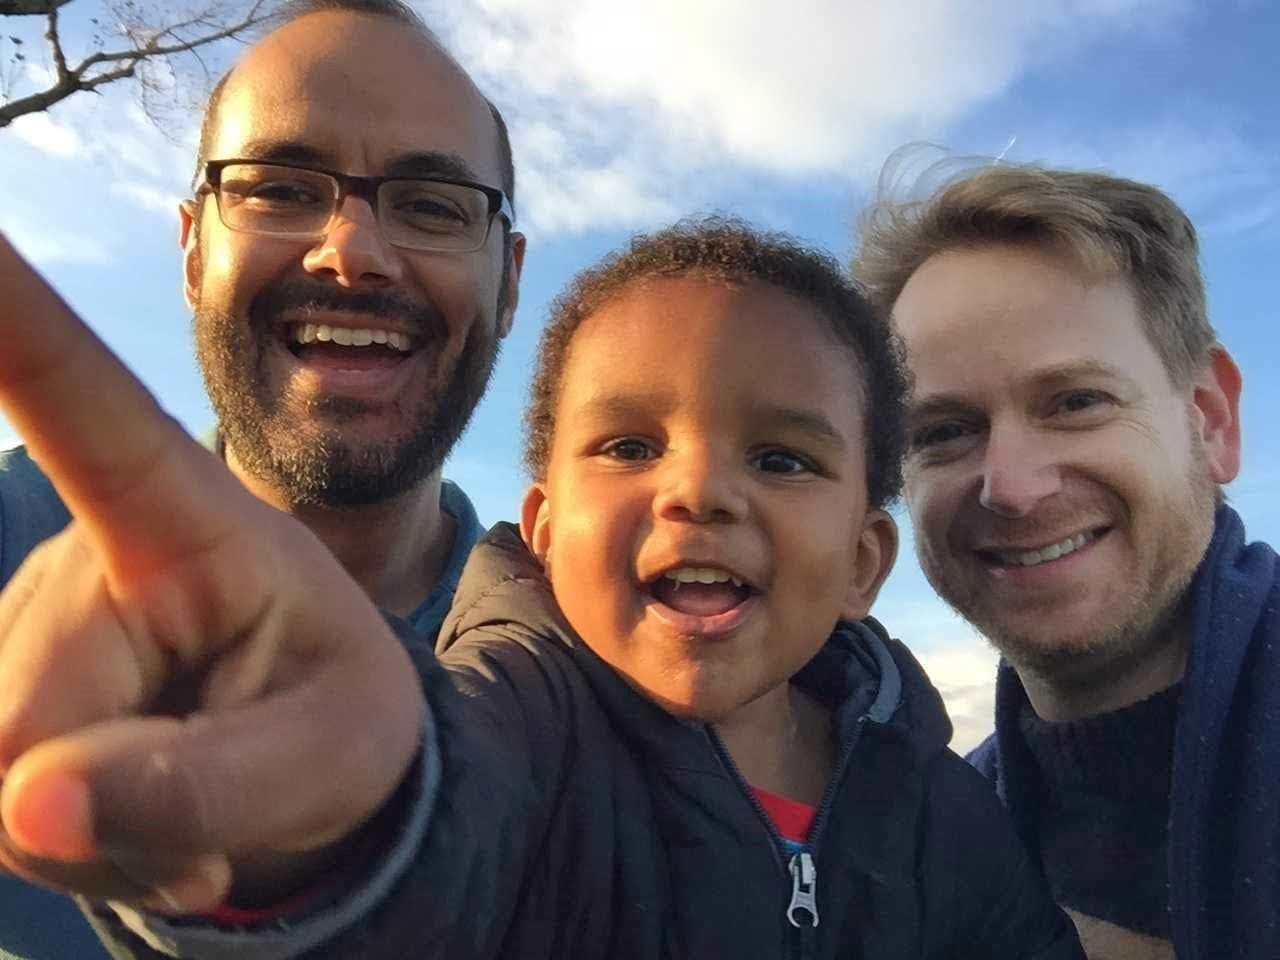 Gay parents called 'rapists' and 'pedophiles' in Amtrak incident